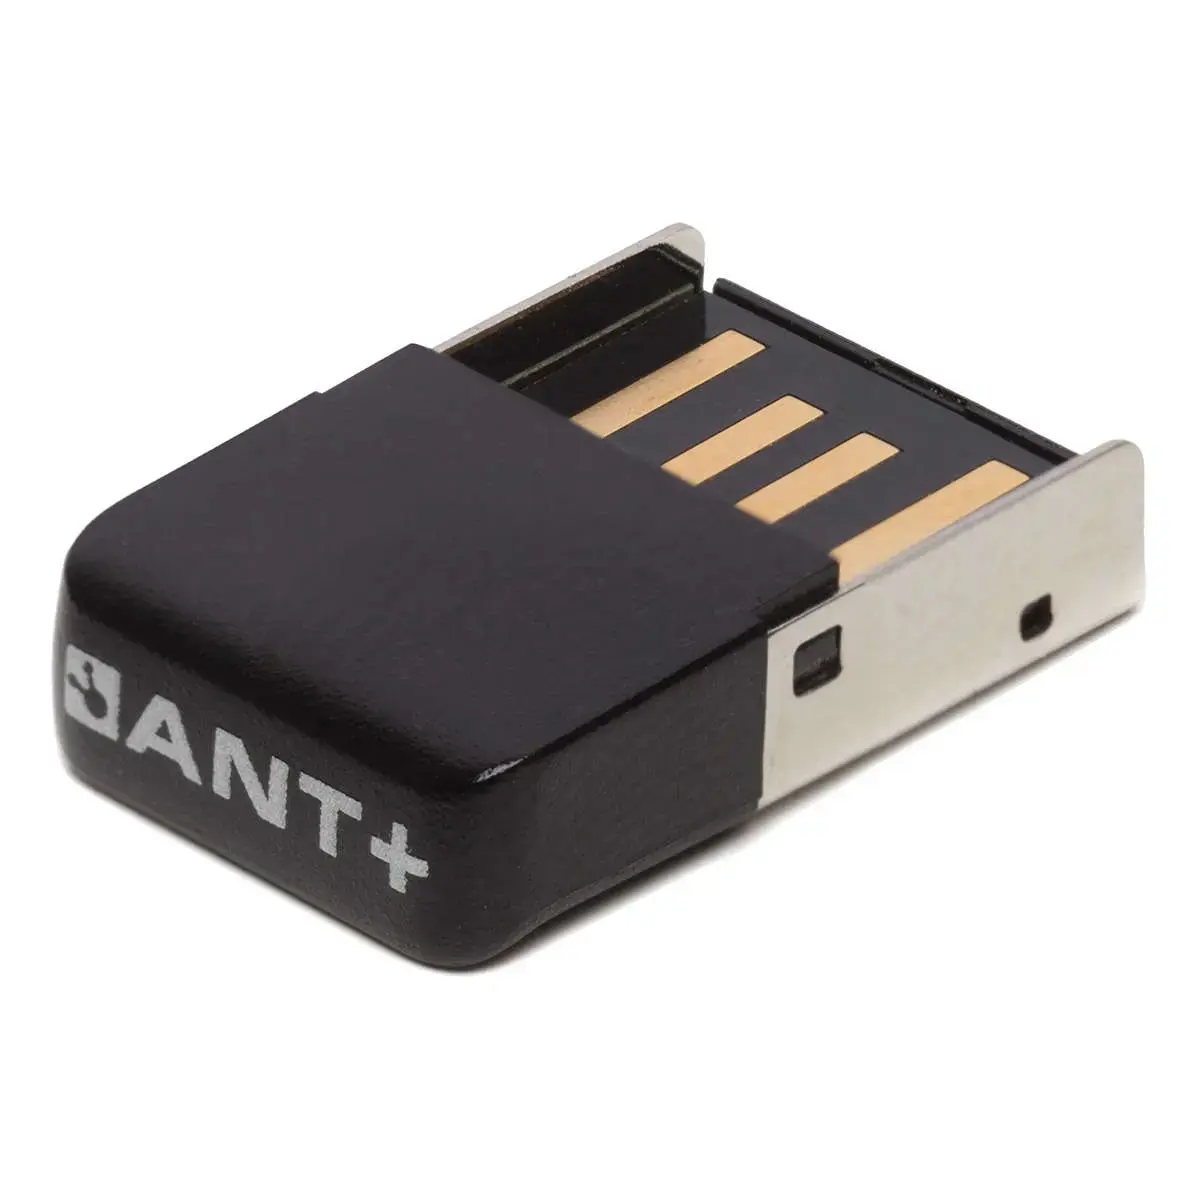 XAND ANT+ Dongle